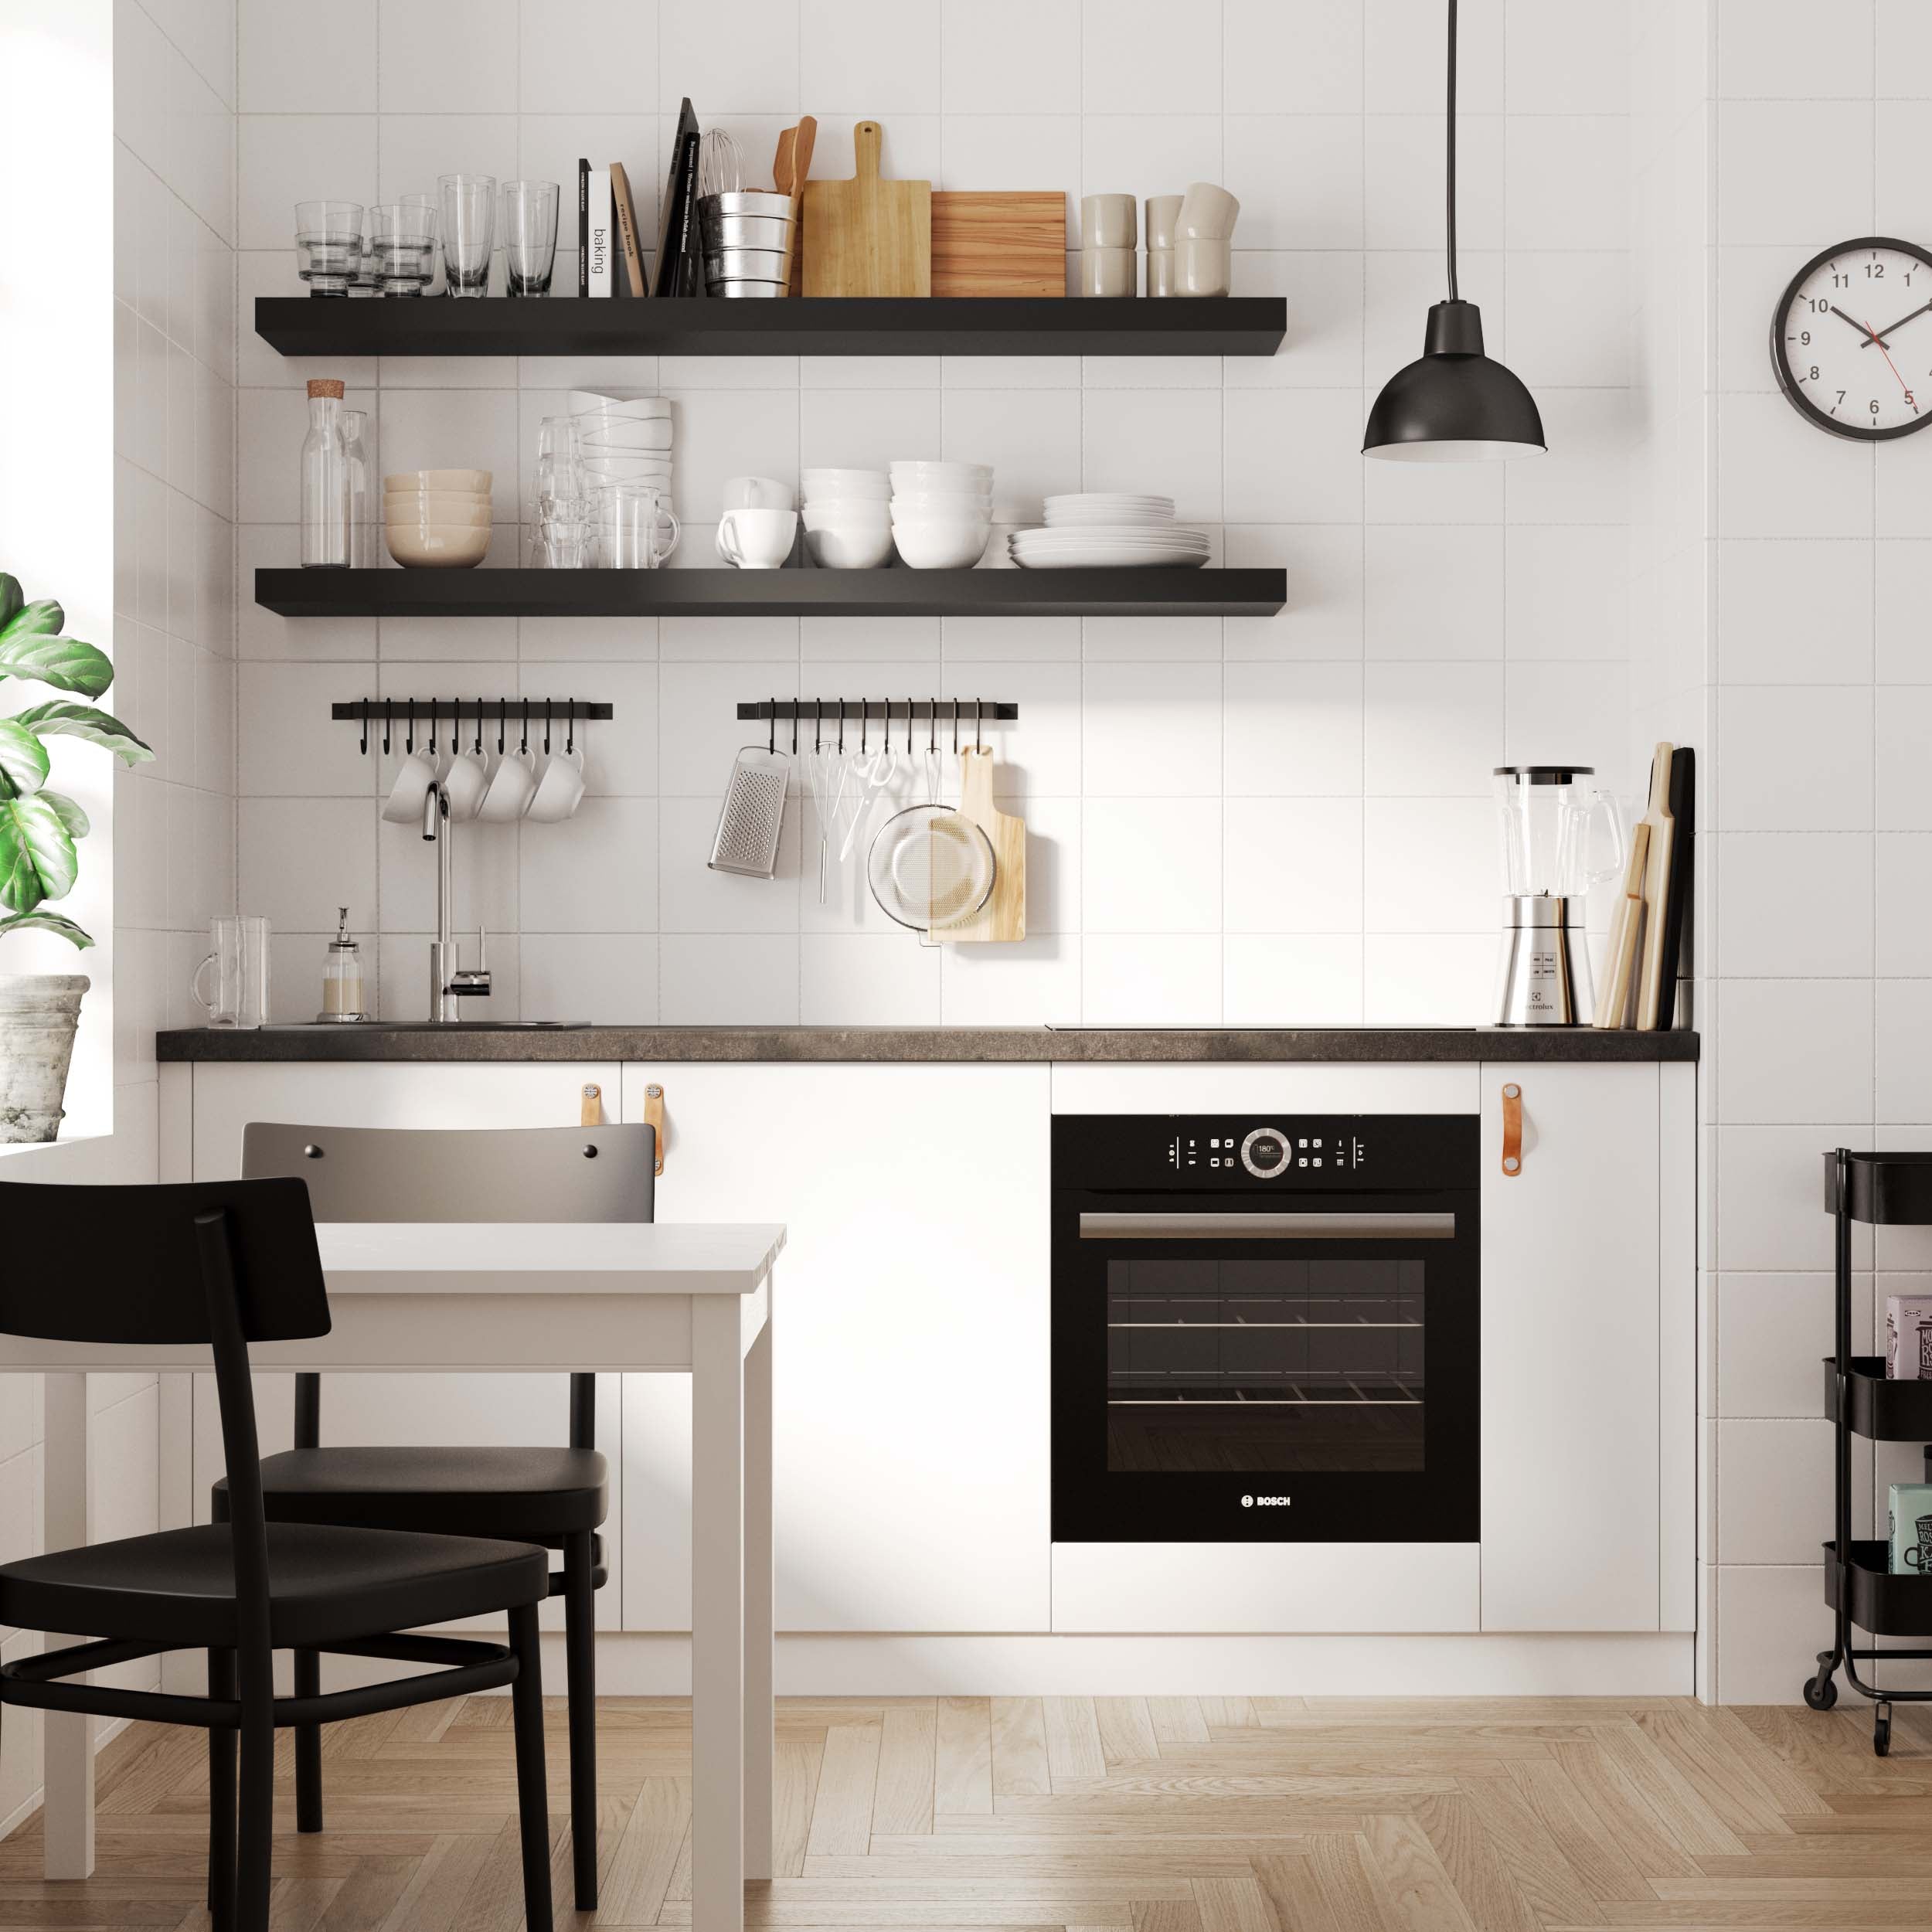 A modern kitchen scene featuring black shelves for wall neatly storing dishes, glasses, and cooking tools above a minimalist kitchen setup.